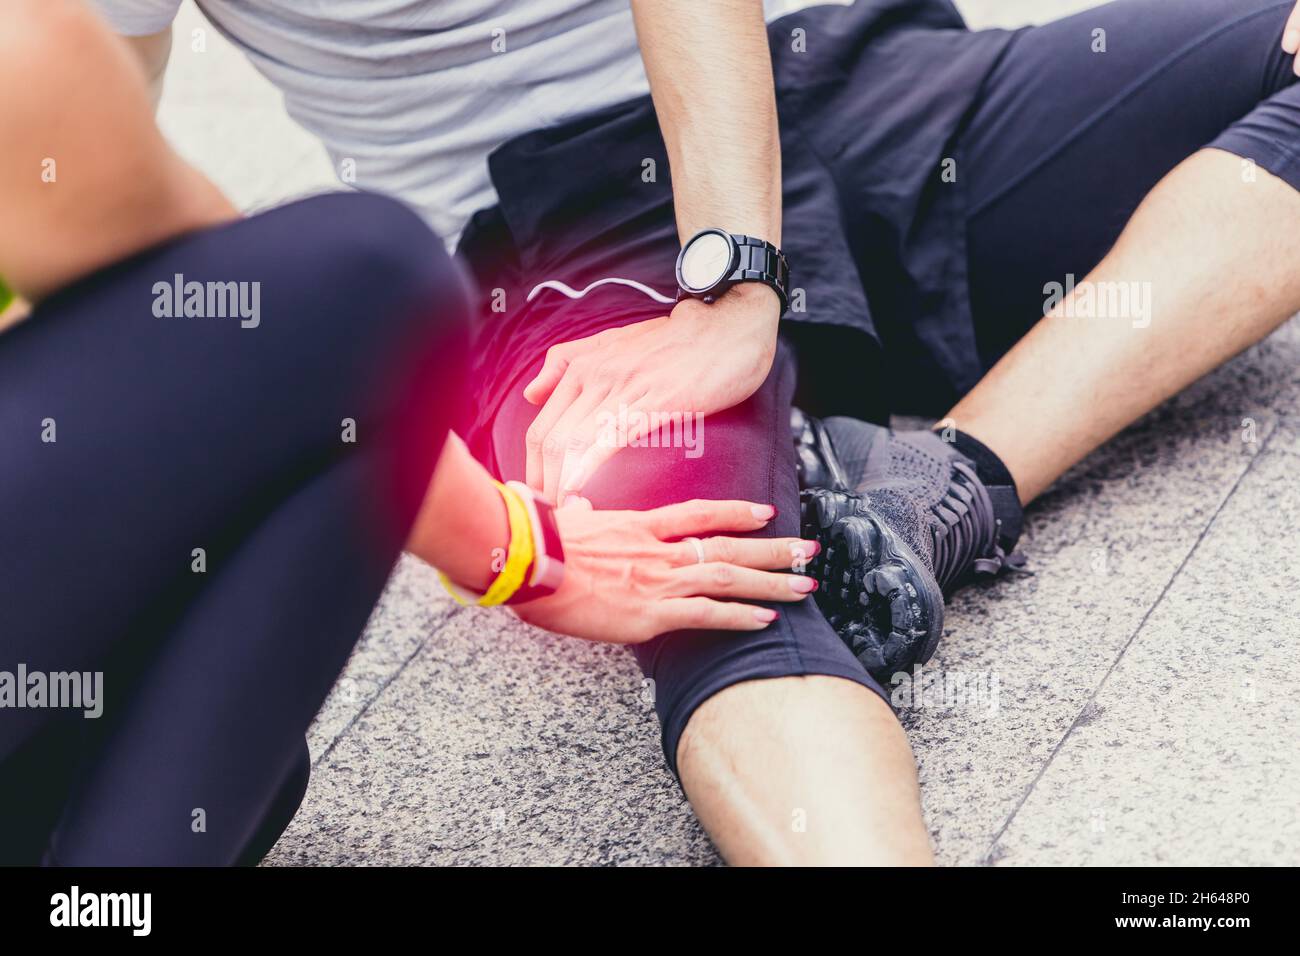 sport athlete people knee injury by force bending or twisting during exercise workout or running Stock Photo